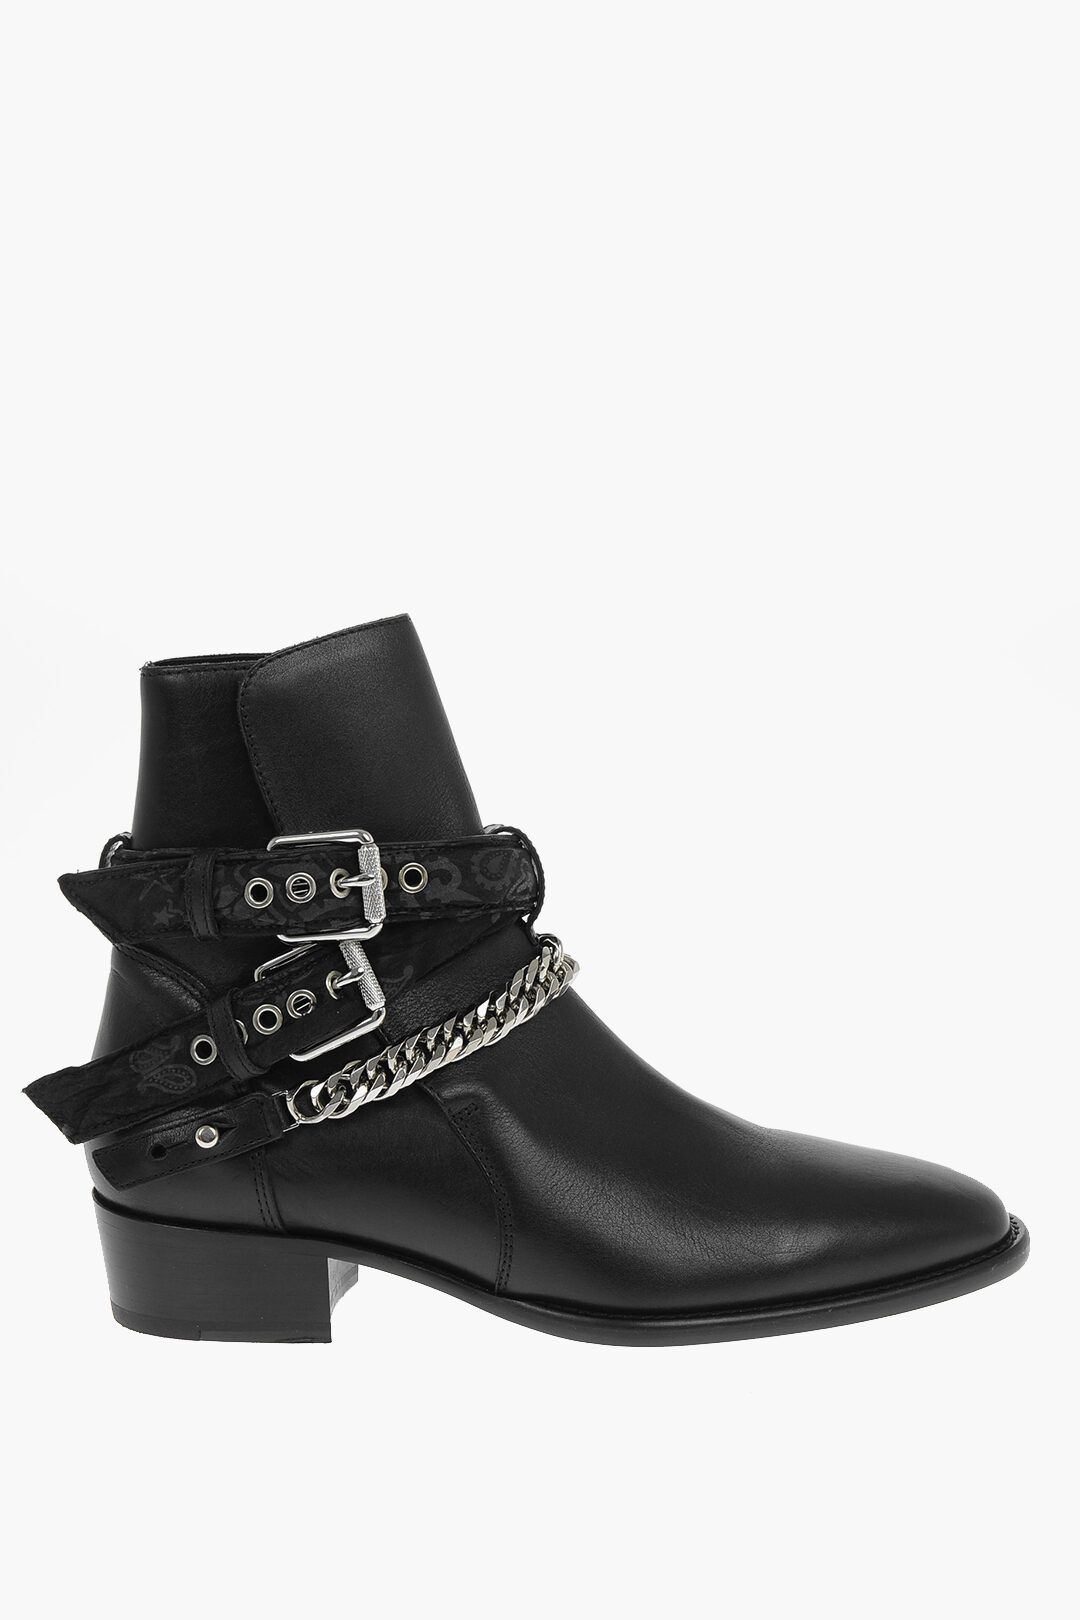 image of Amiri Leather Bandana Boots With Straps in Black, Men's (Size 10)